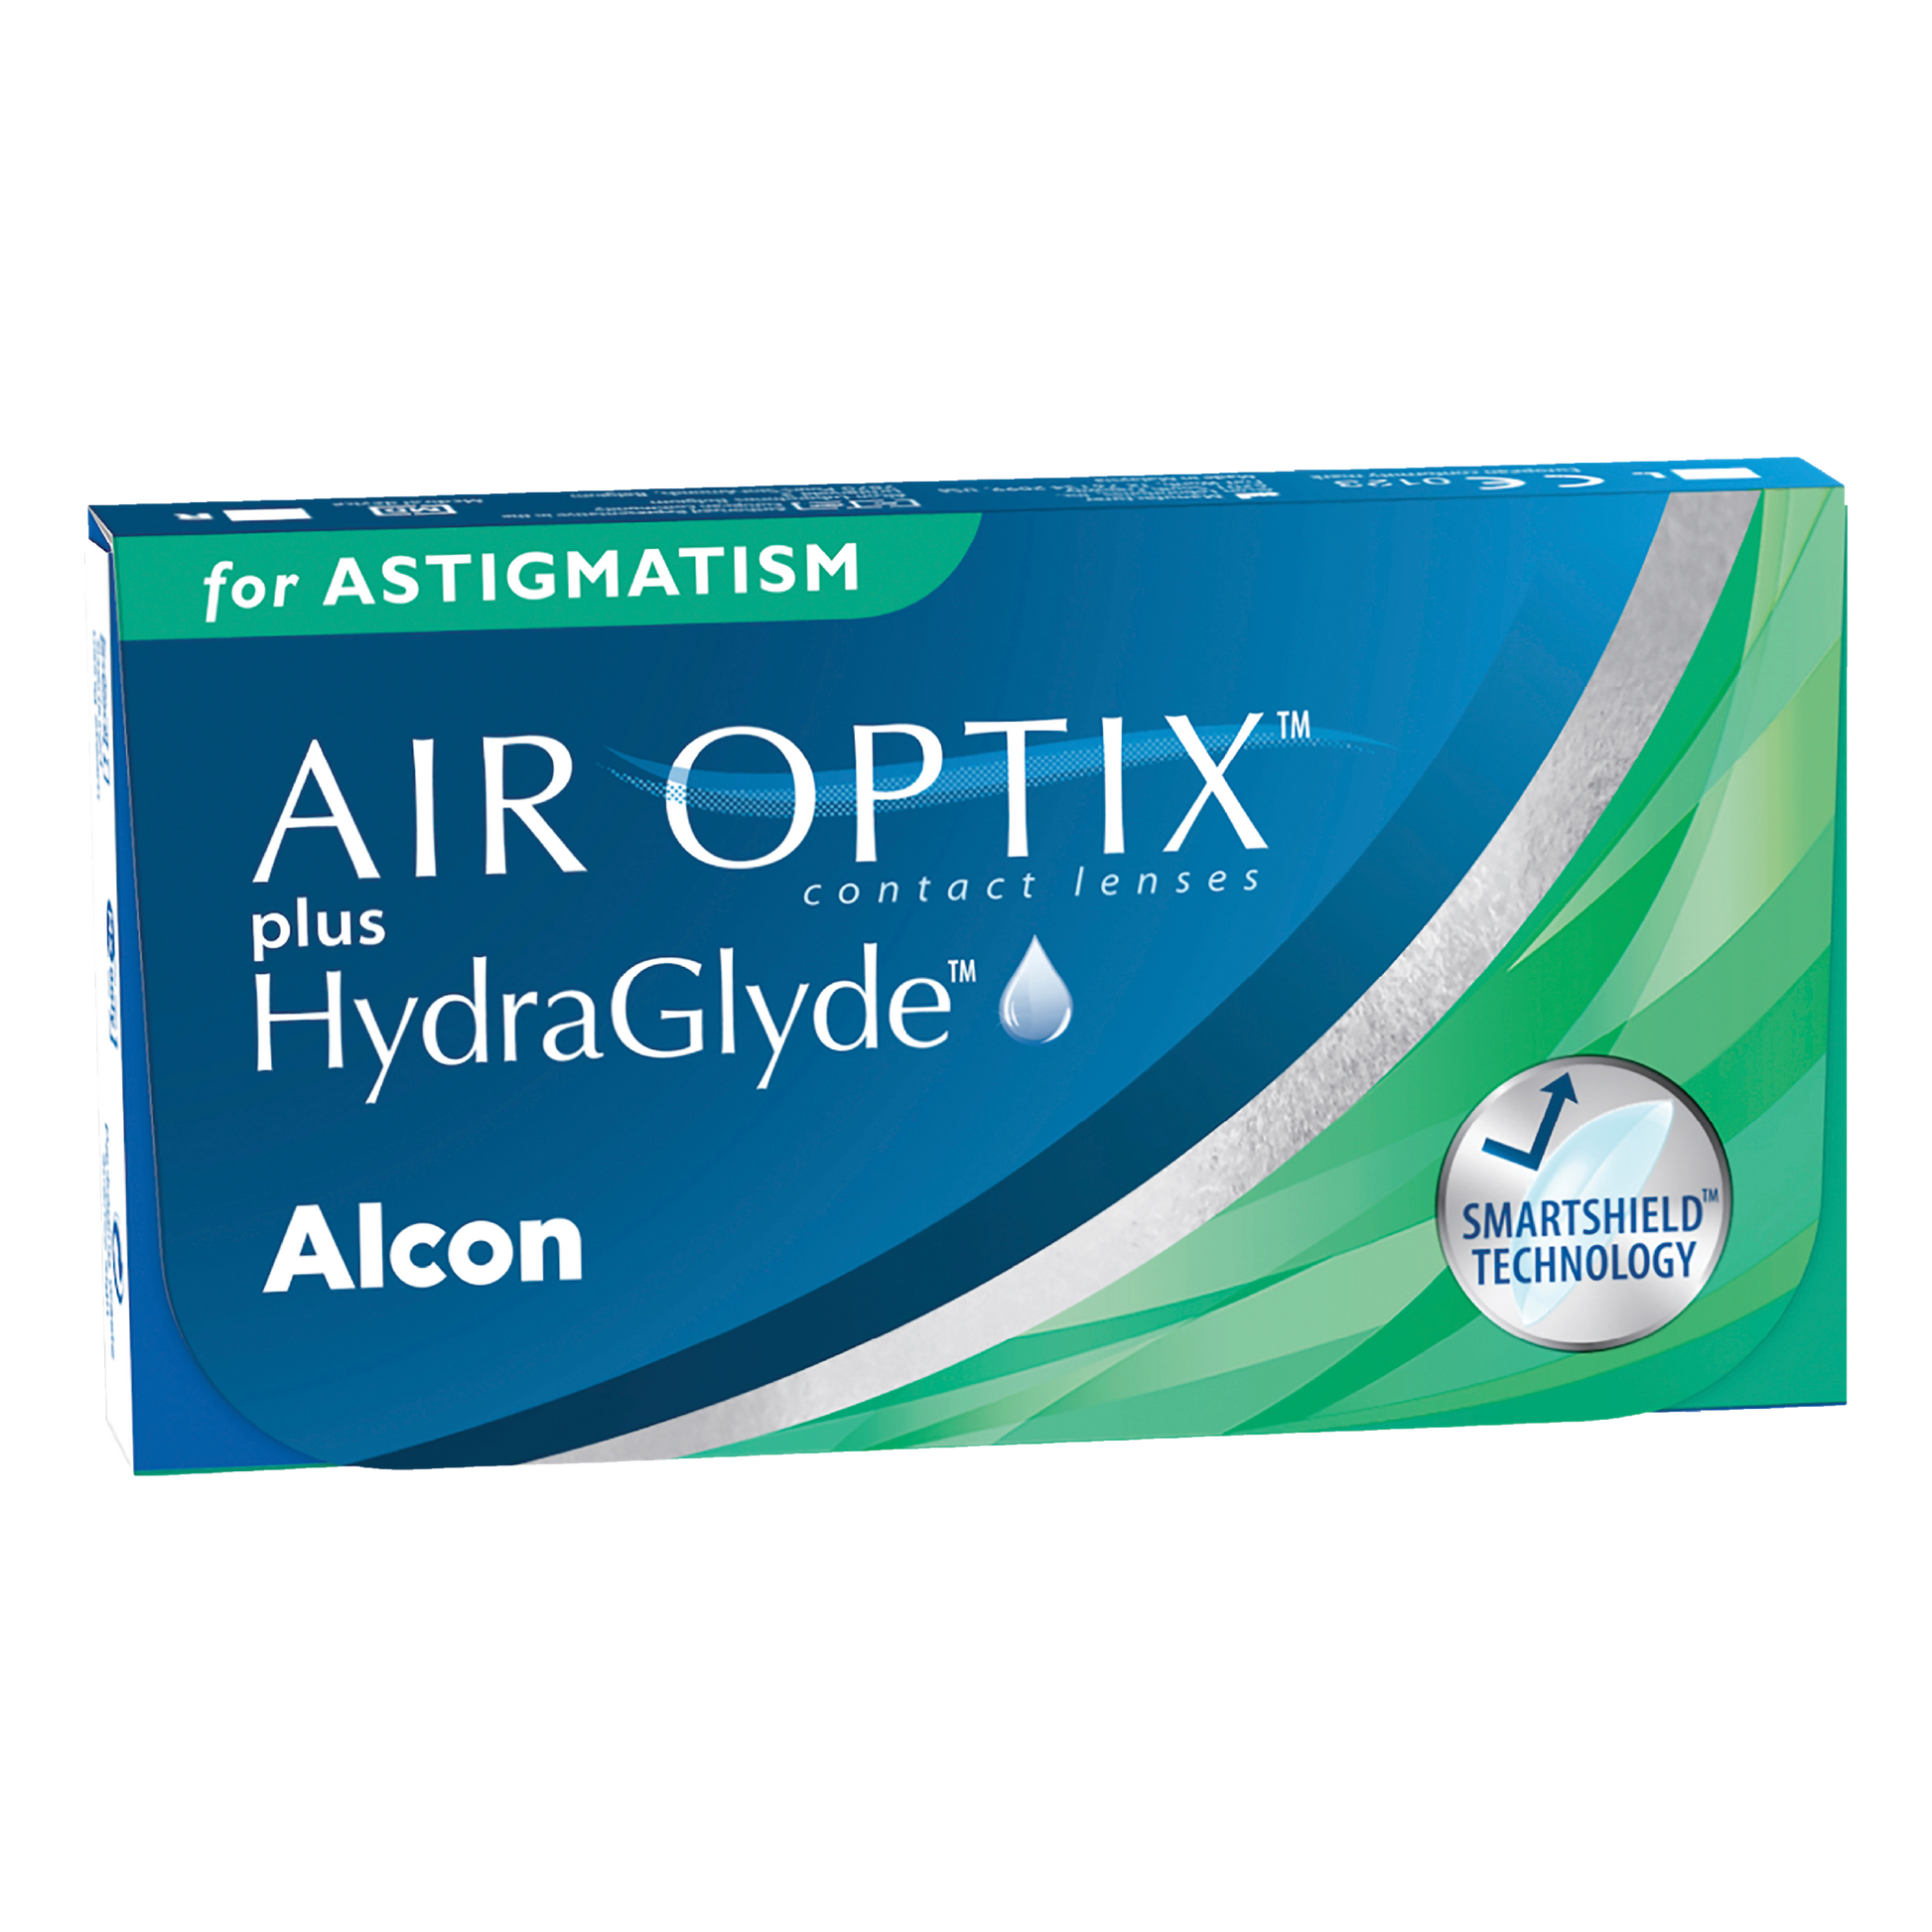 Box of Alcon Air Optix plus Hydraglyde for Astigmatism contact lenses